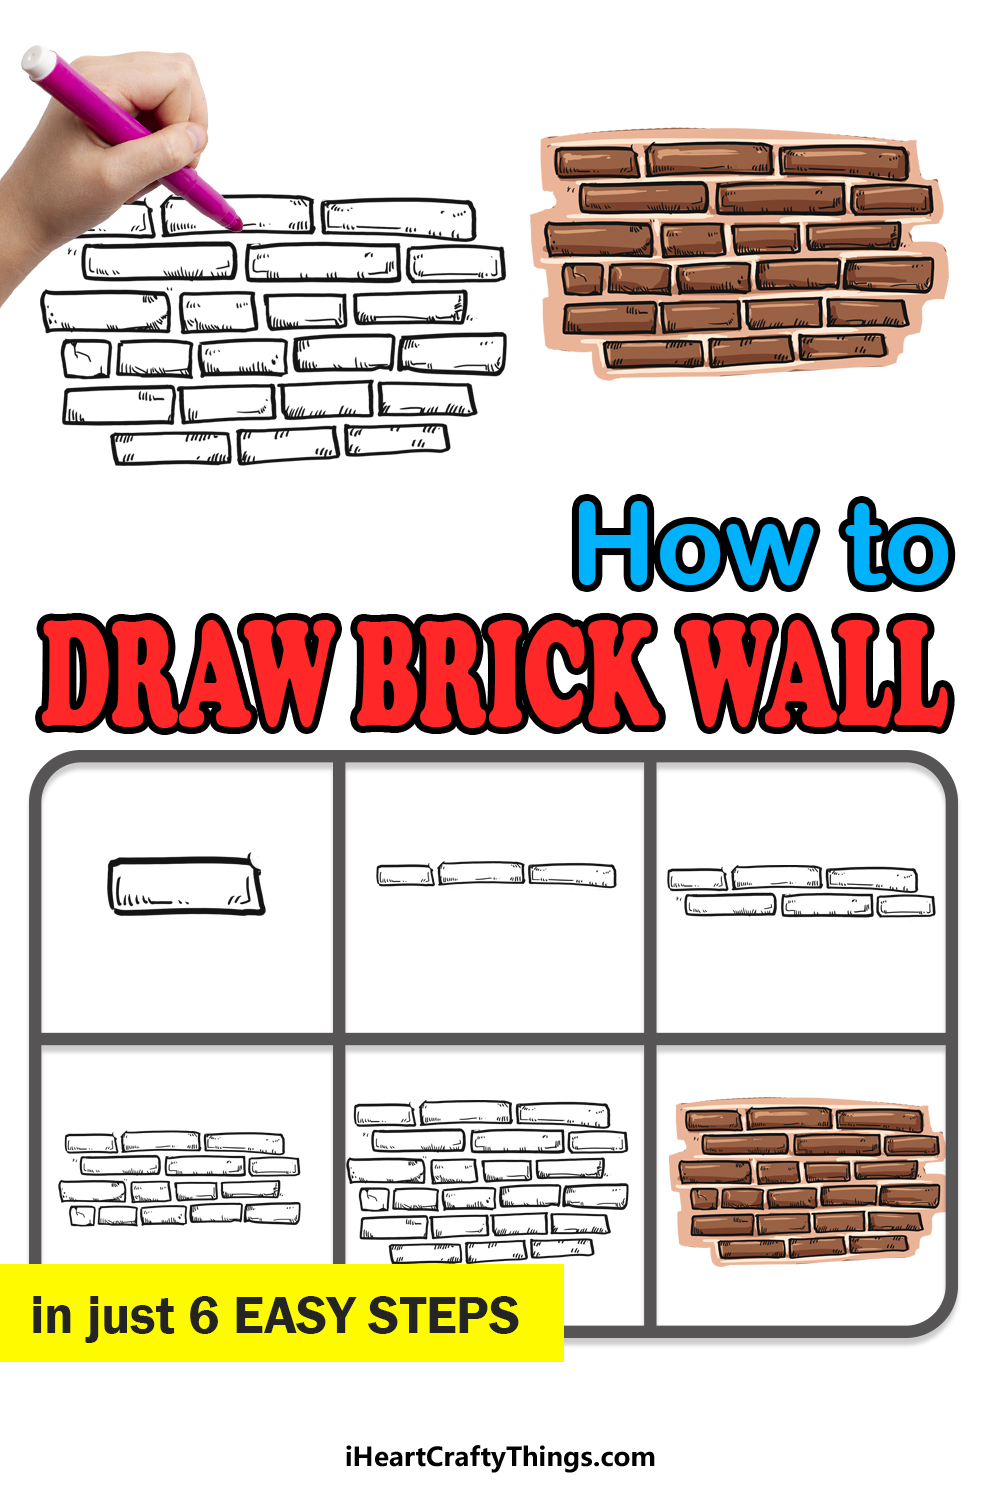 How to Draw A Brick Wall step by step guide